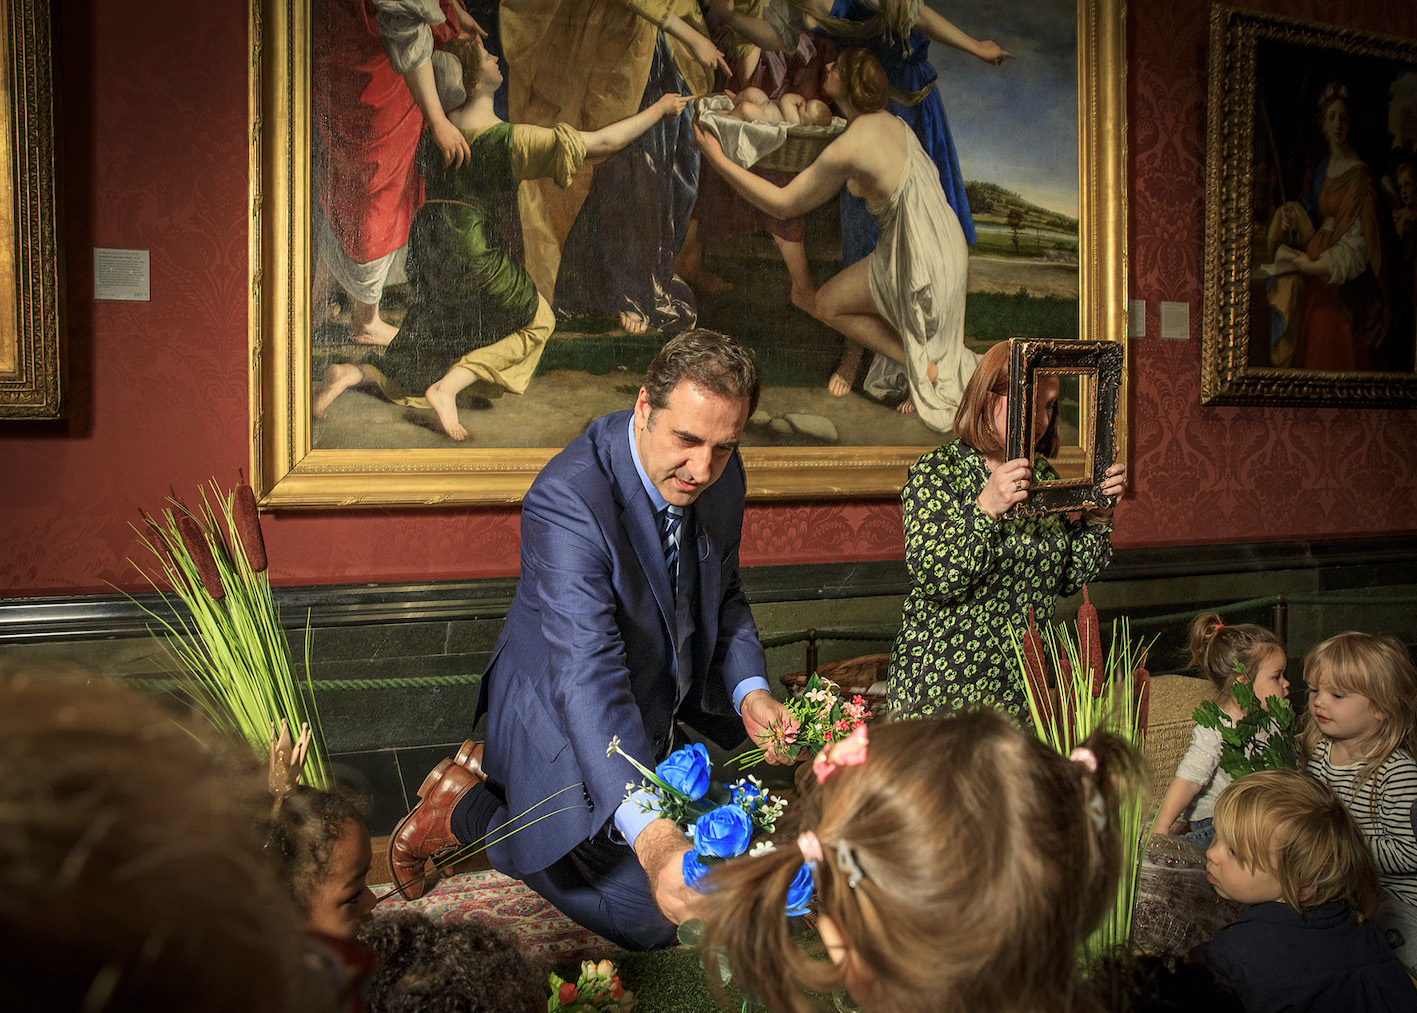 National Gallery Director, Dr Gabriele Finaldi, launching the #SaveOrazio Appeal by hosting a The Finding of Moses storytelling session with a group of children from the Soho Family Centre. Photo © The National Gallery, London